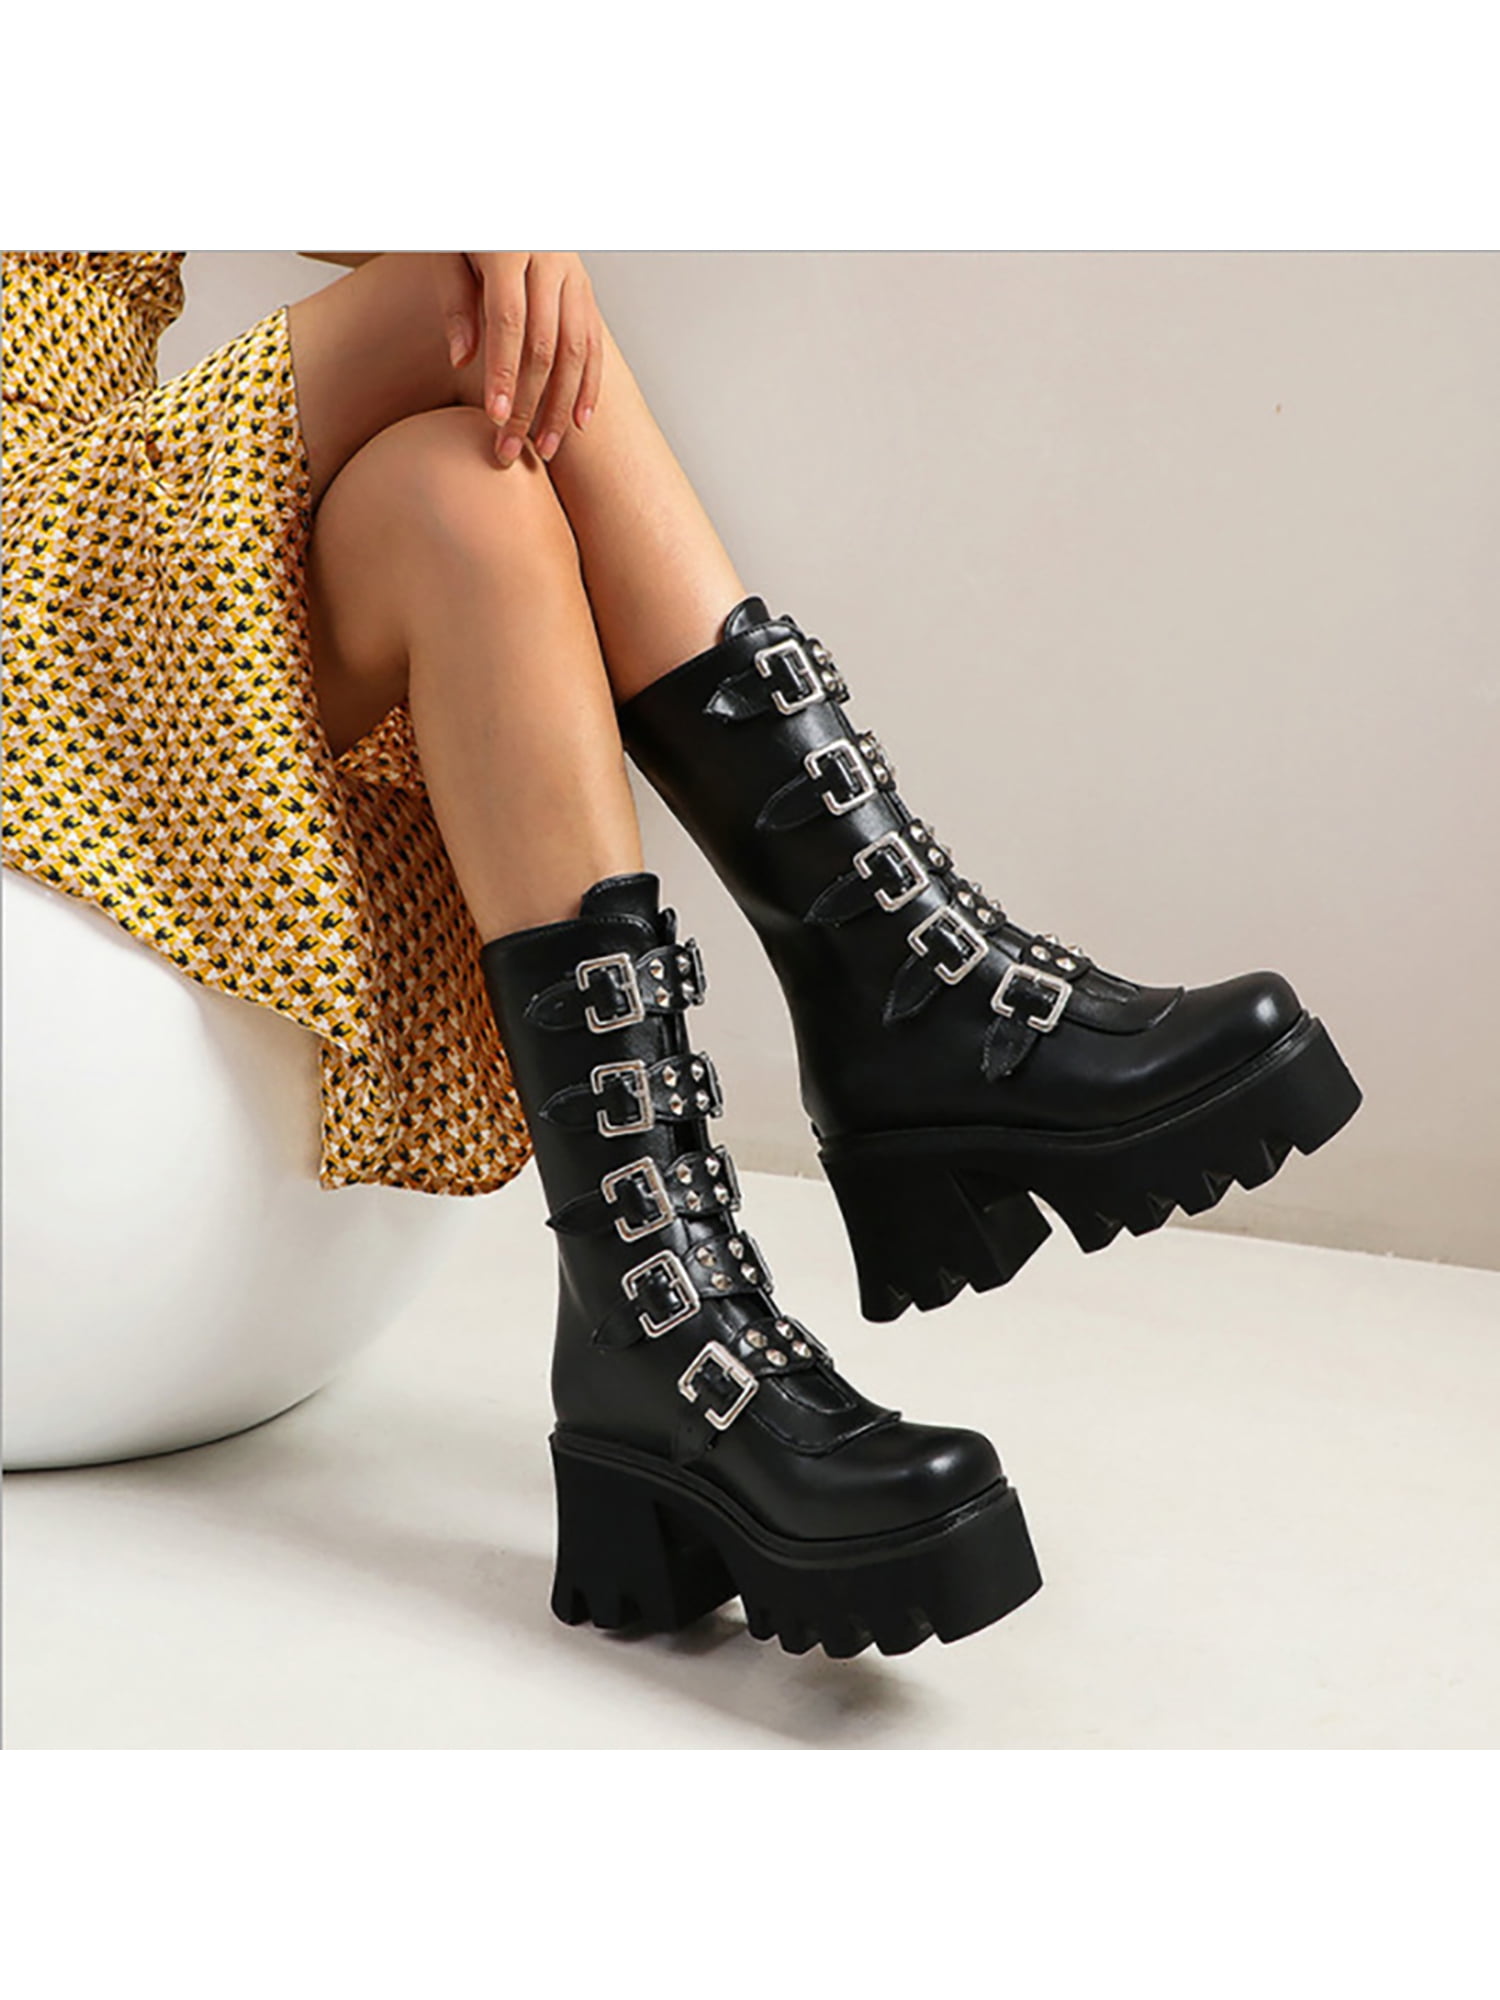 Women's Zipper Fashion Chunky High Heel Platform Studded Ankle Bootie Shoes NEW 